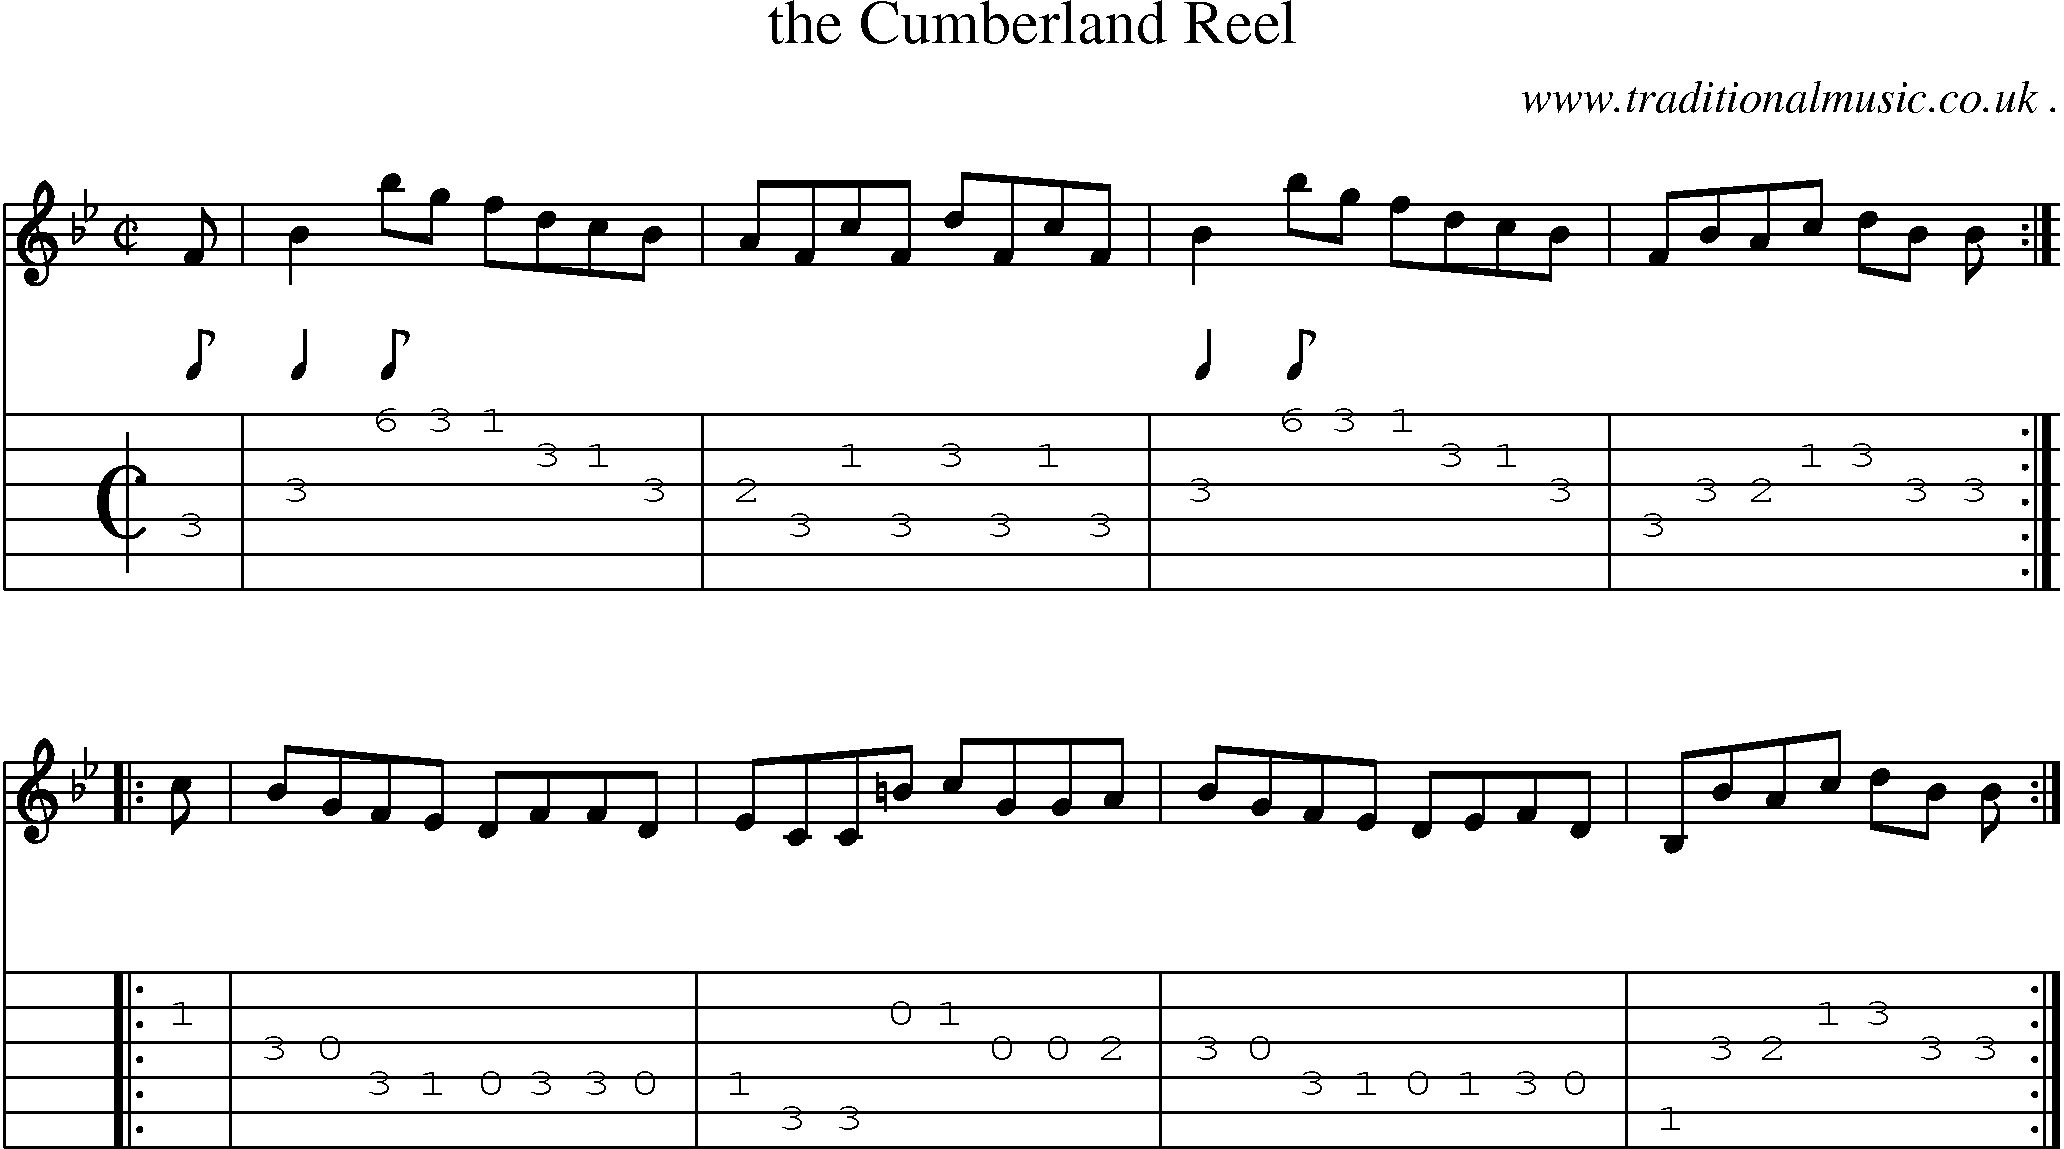 Sheet-Music and Guitar Tabs for The Cumberland Reel